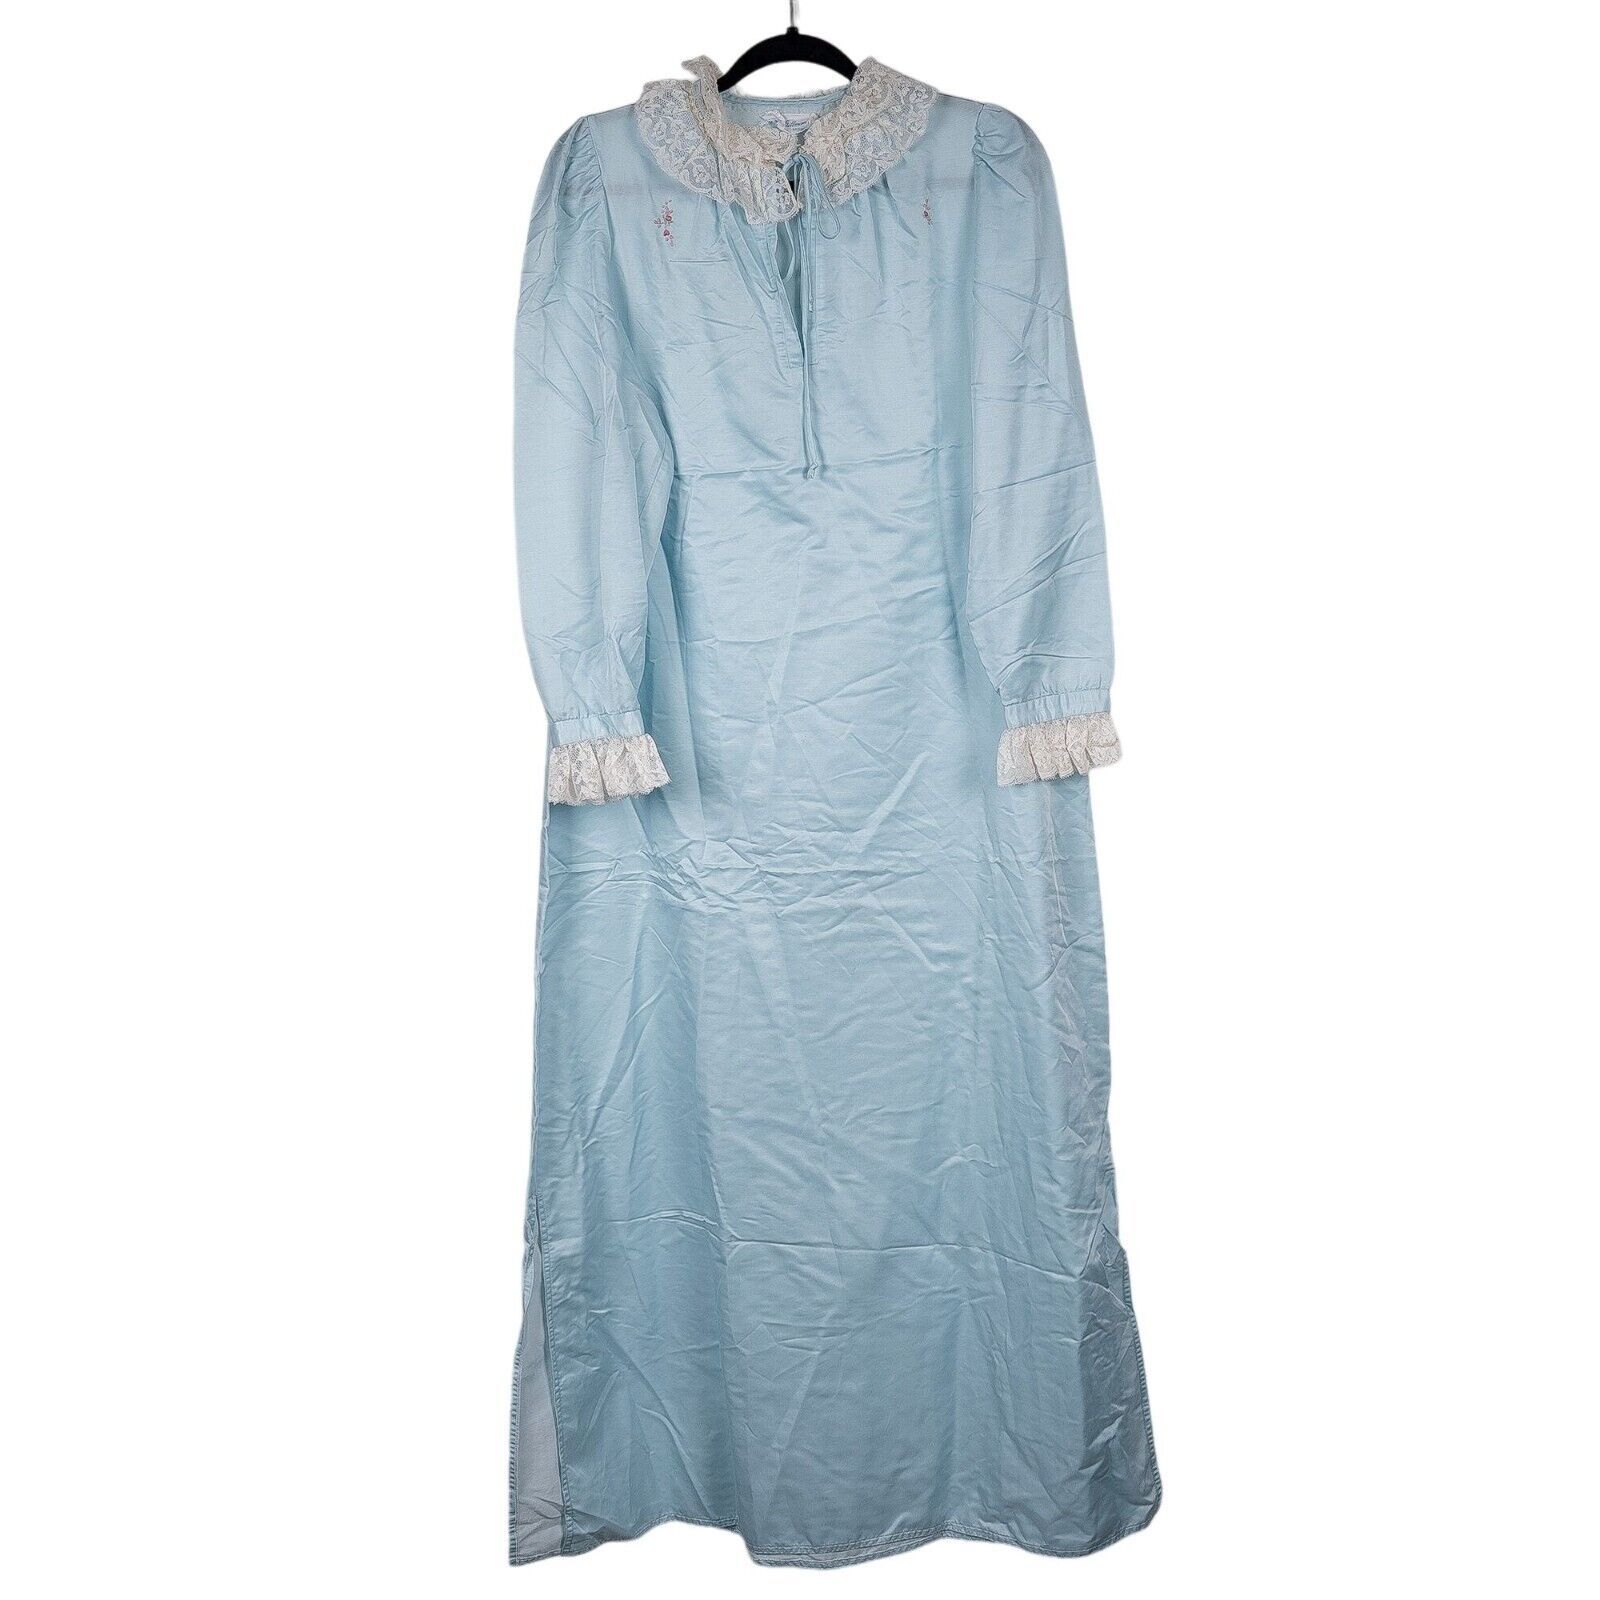 Primary image for Eve Stillman VTG Nightgown Womens L Blue Long Sleeve Lace Collar Lined Delicate